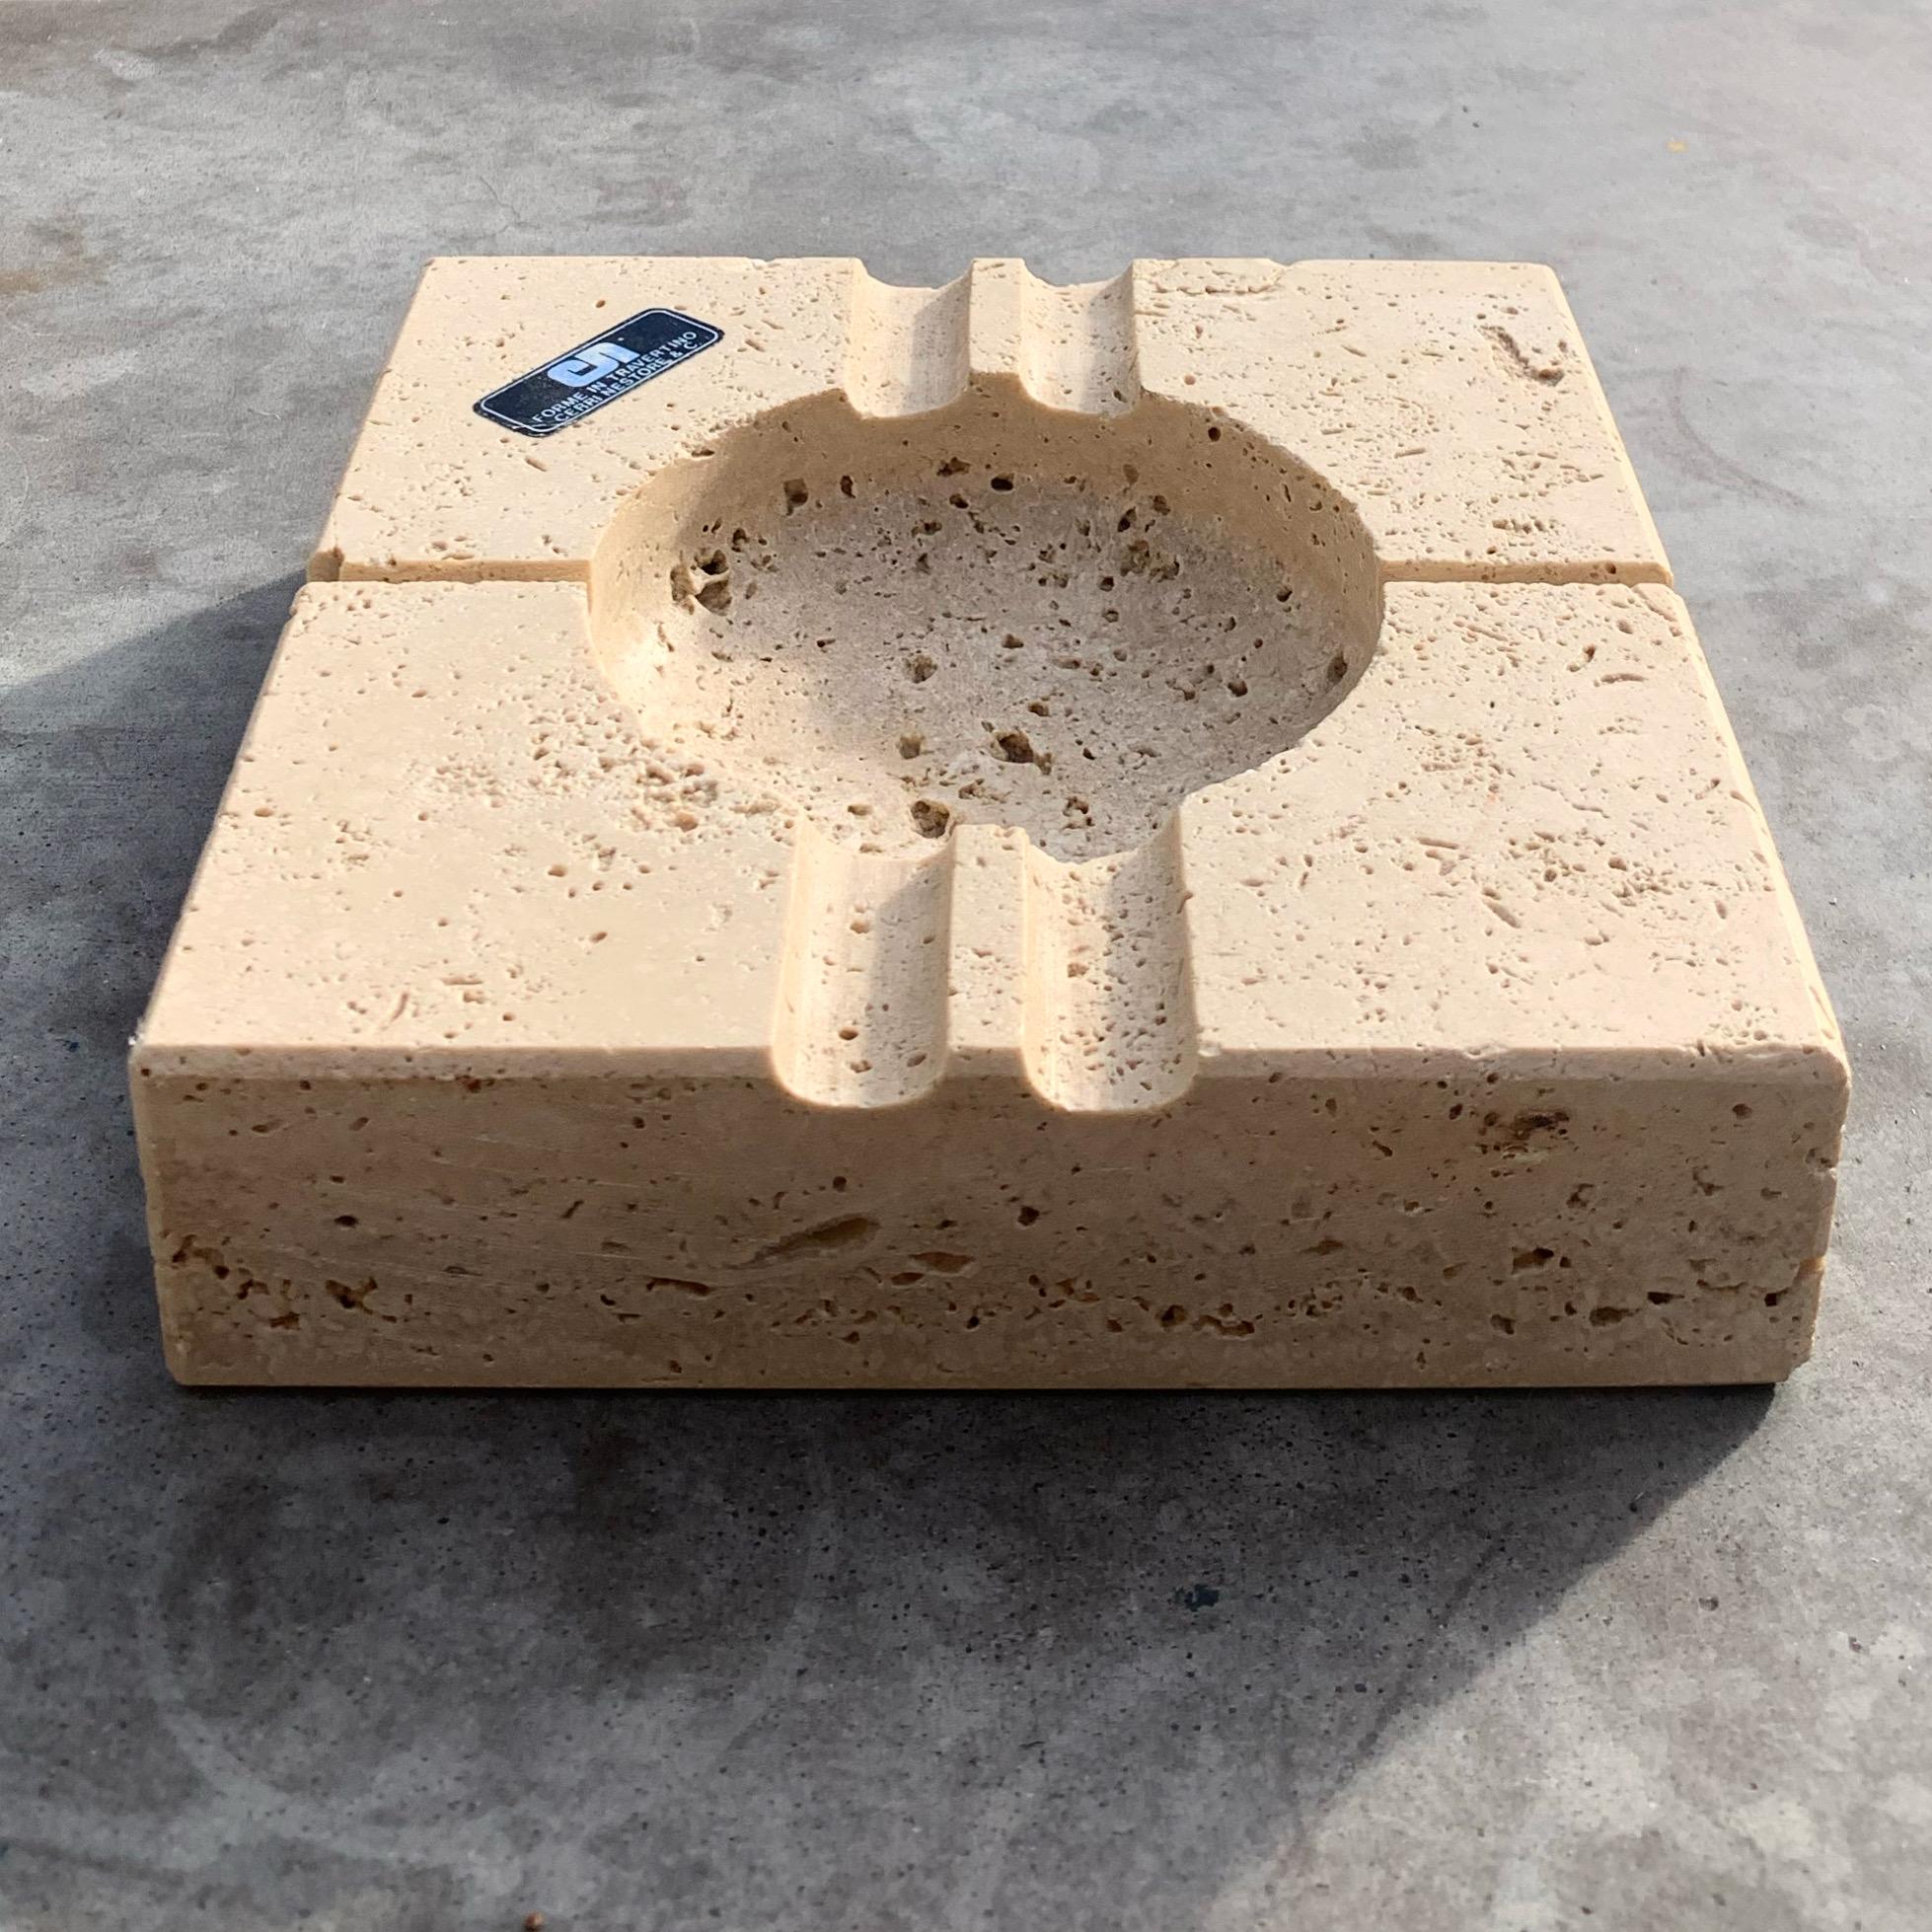 1970s Cerri Nestore ashtray in solid travertine. Minor signs of age (as in slide 8) but overall fab condition.
Measures: 5.5” x 5.5” x 1.5”.